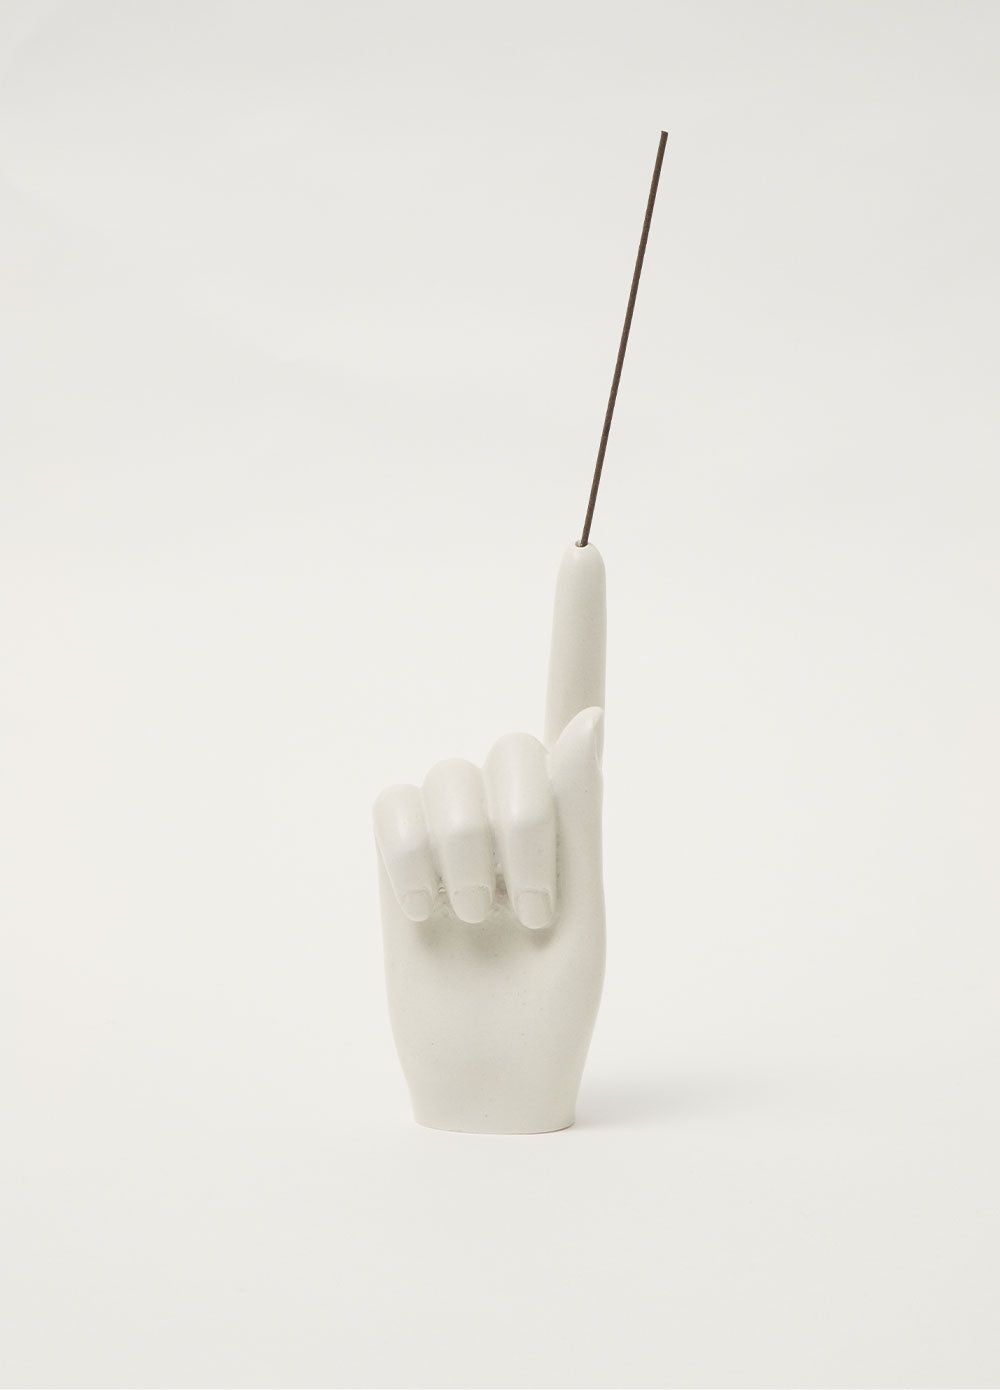 The Marble Hand Incense Holder